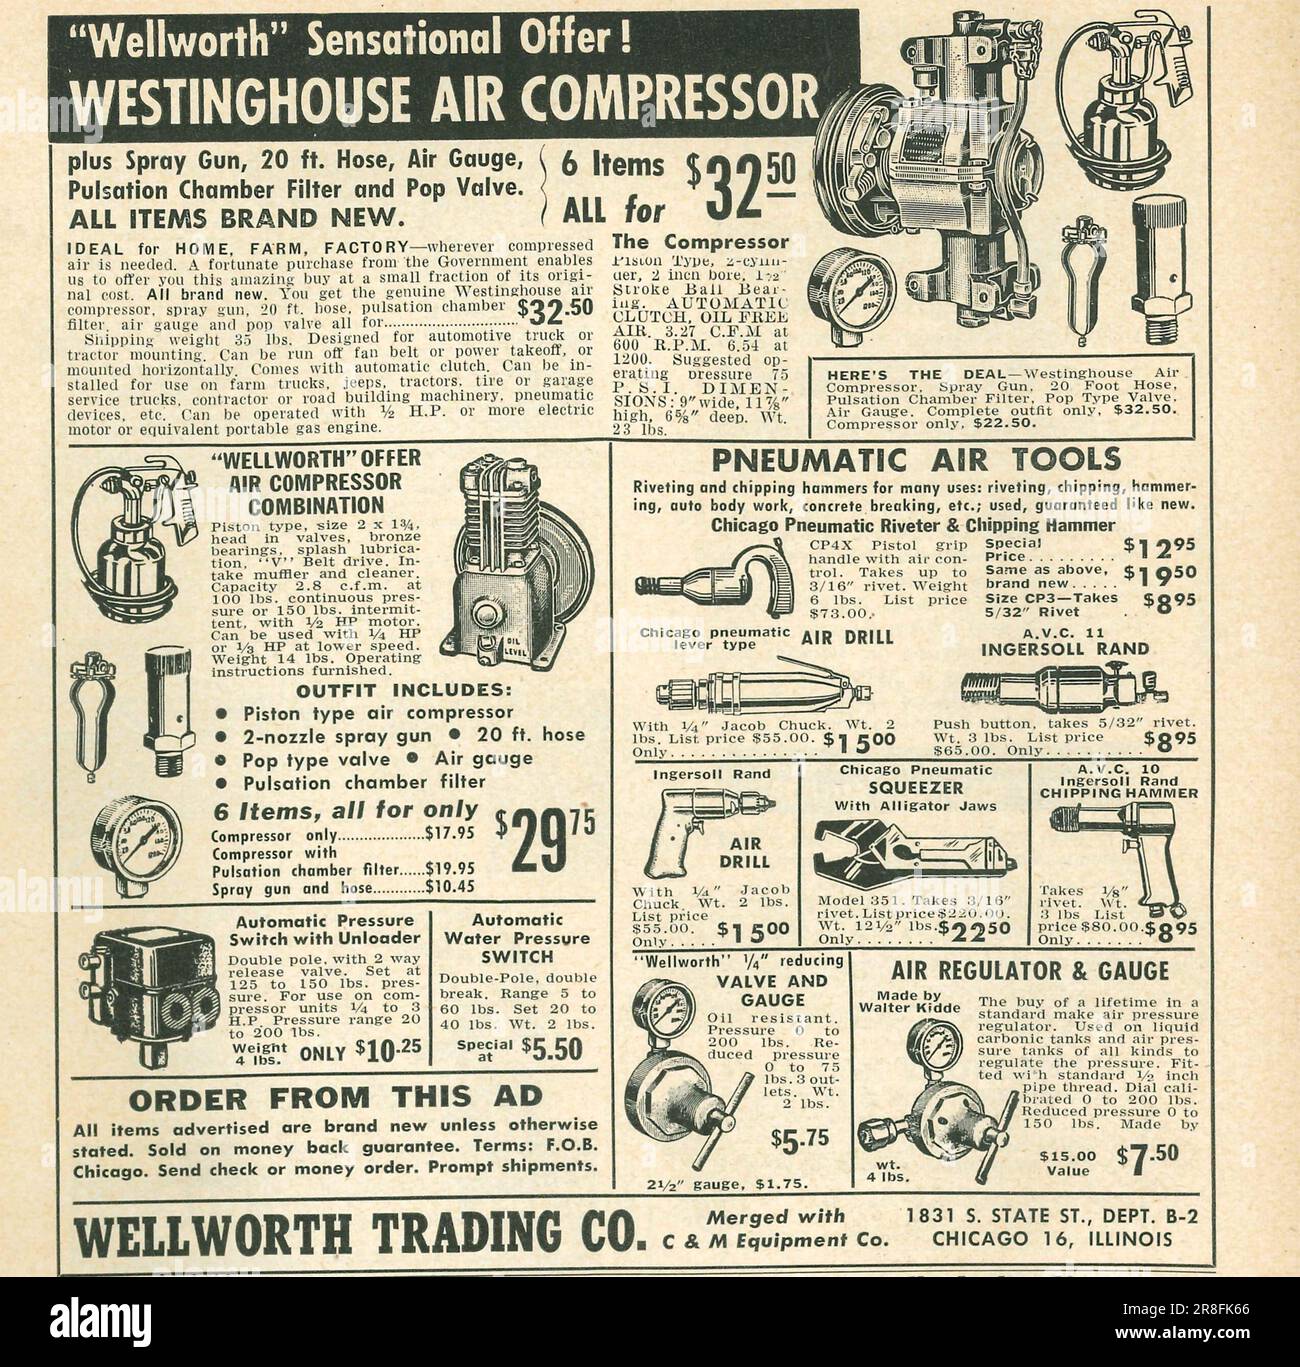 Westinghouse air compressor - Wellworth trading co Illinois, pneumatic air tools, air gauge, advert in a magazine 1949 Stock Photo